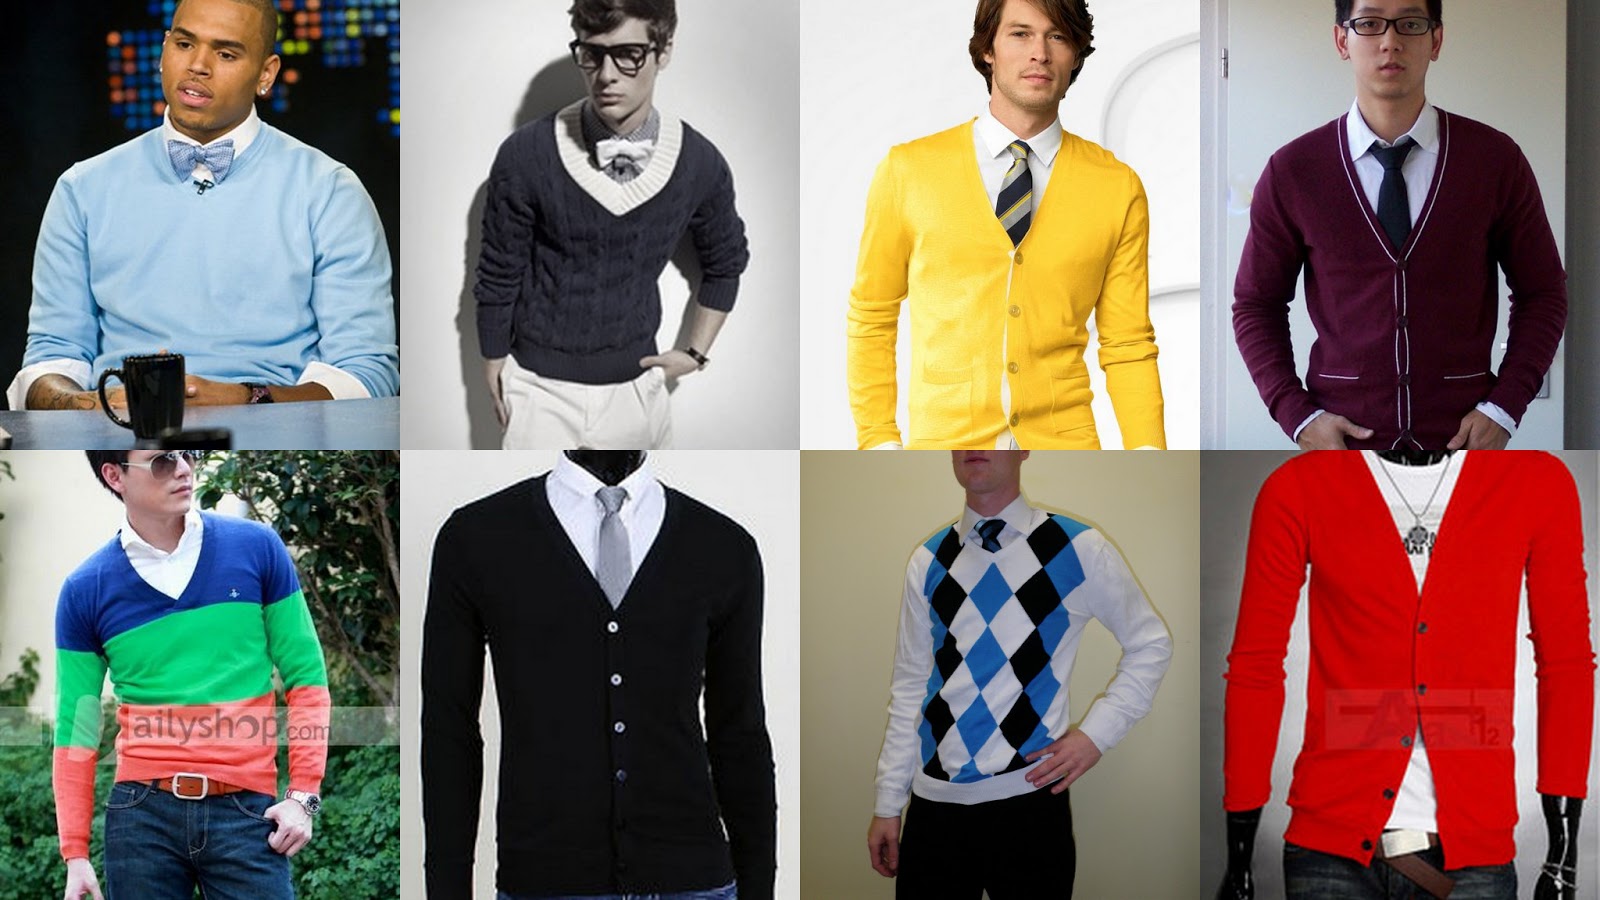 Raquel Daily Blog: GUYS, YOUR TURN; BRINGING COLOR BACK TO FORMAL